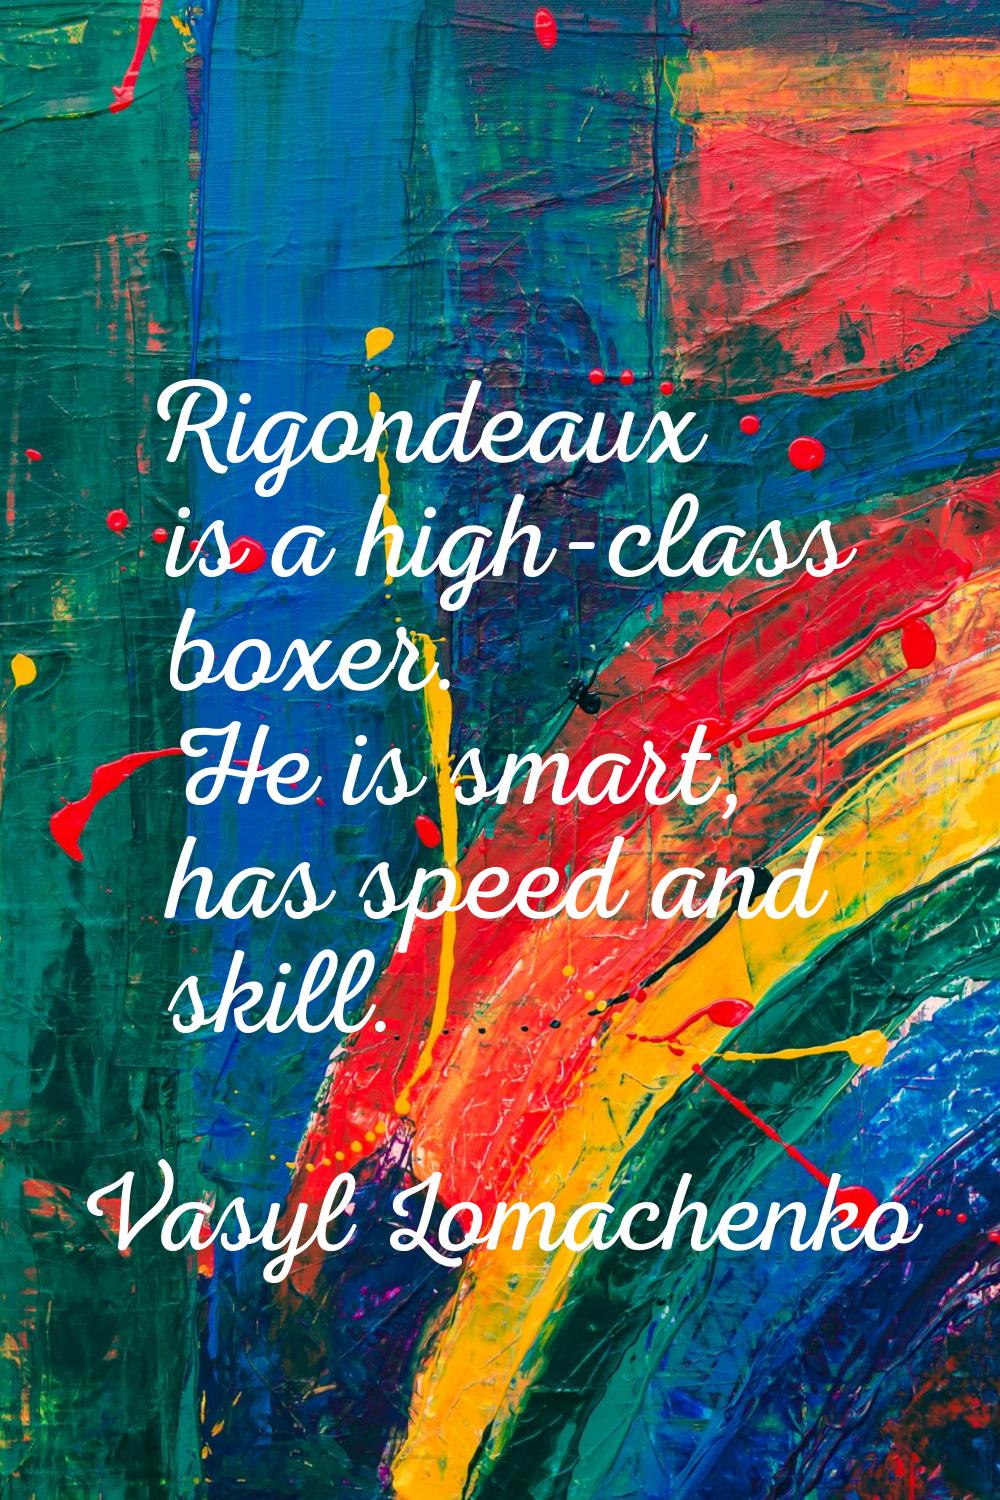 Rigondeaux is a high-class boxer. He is smart, has speed and skill.